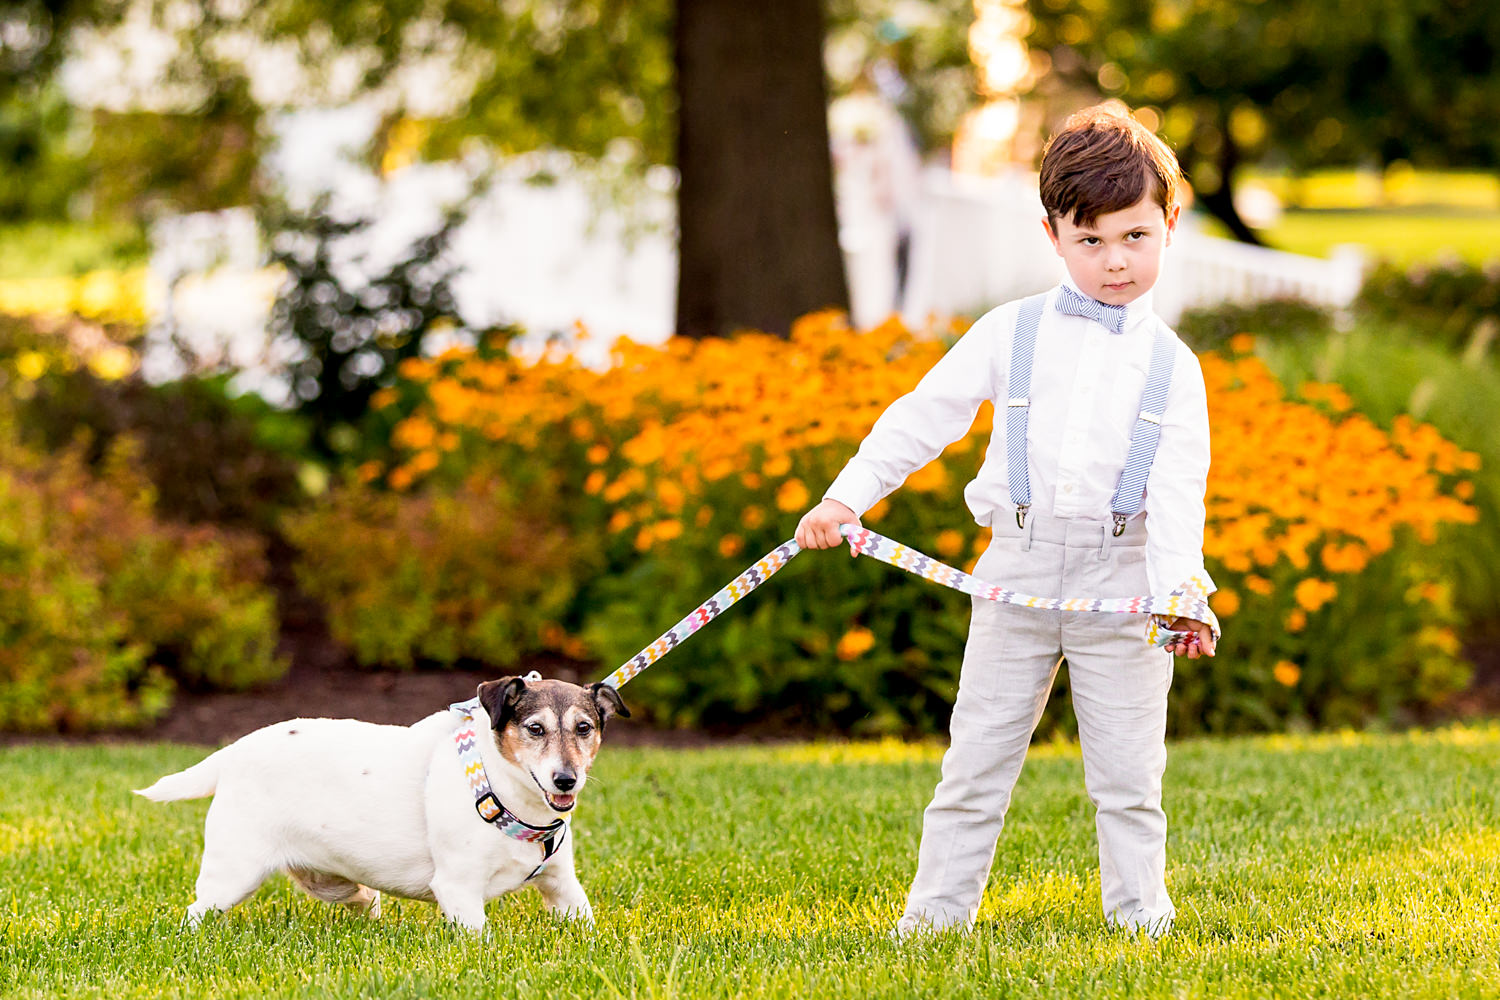 Eastern Shore wedding, Maryland, the ring bearer who is about five years old is overtly annoyed that the dog he is walking down the aisle on a leash is refusing to walk, he is comically tugging on the leash while the overweight jack Russel terrier is refusing to move, the little boy has a grumpy, pouting face as he clearly is over it and doesn't want to deal with the stubborn pup, kids at weddings, dogs at weddings, the boy is in a bowtie and suspenders, they are outside with a row of flowers behind them, the ceremony is on the water, Procopio Photography, best top Washington DC photographer, best top Maryland photographer, best top Virginia photographer, best top DMV photographer, best top wedding photographer, best top commercial photographer, best top portrait photographer, best top boudoir photographer, modern fine art portraits, dramatic, unique, different, bold, editorial, photojournalism, award winning photographer, published photographer, memorable images, be different, stand out